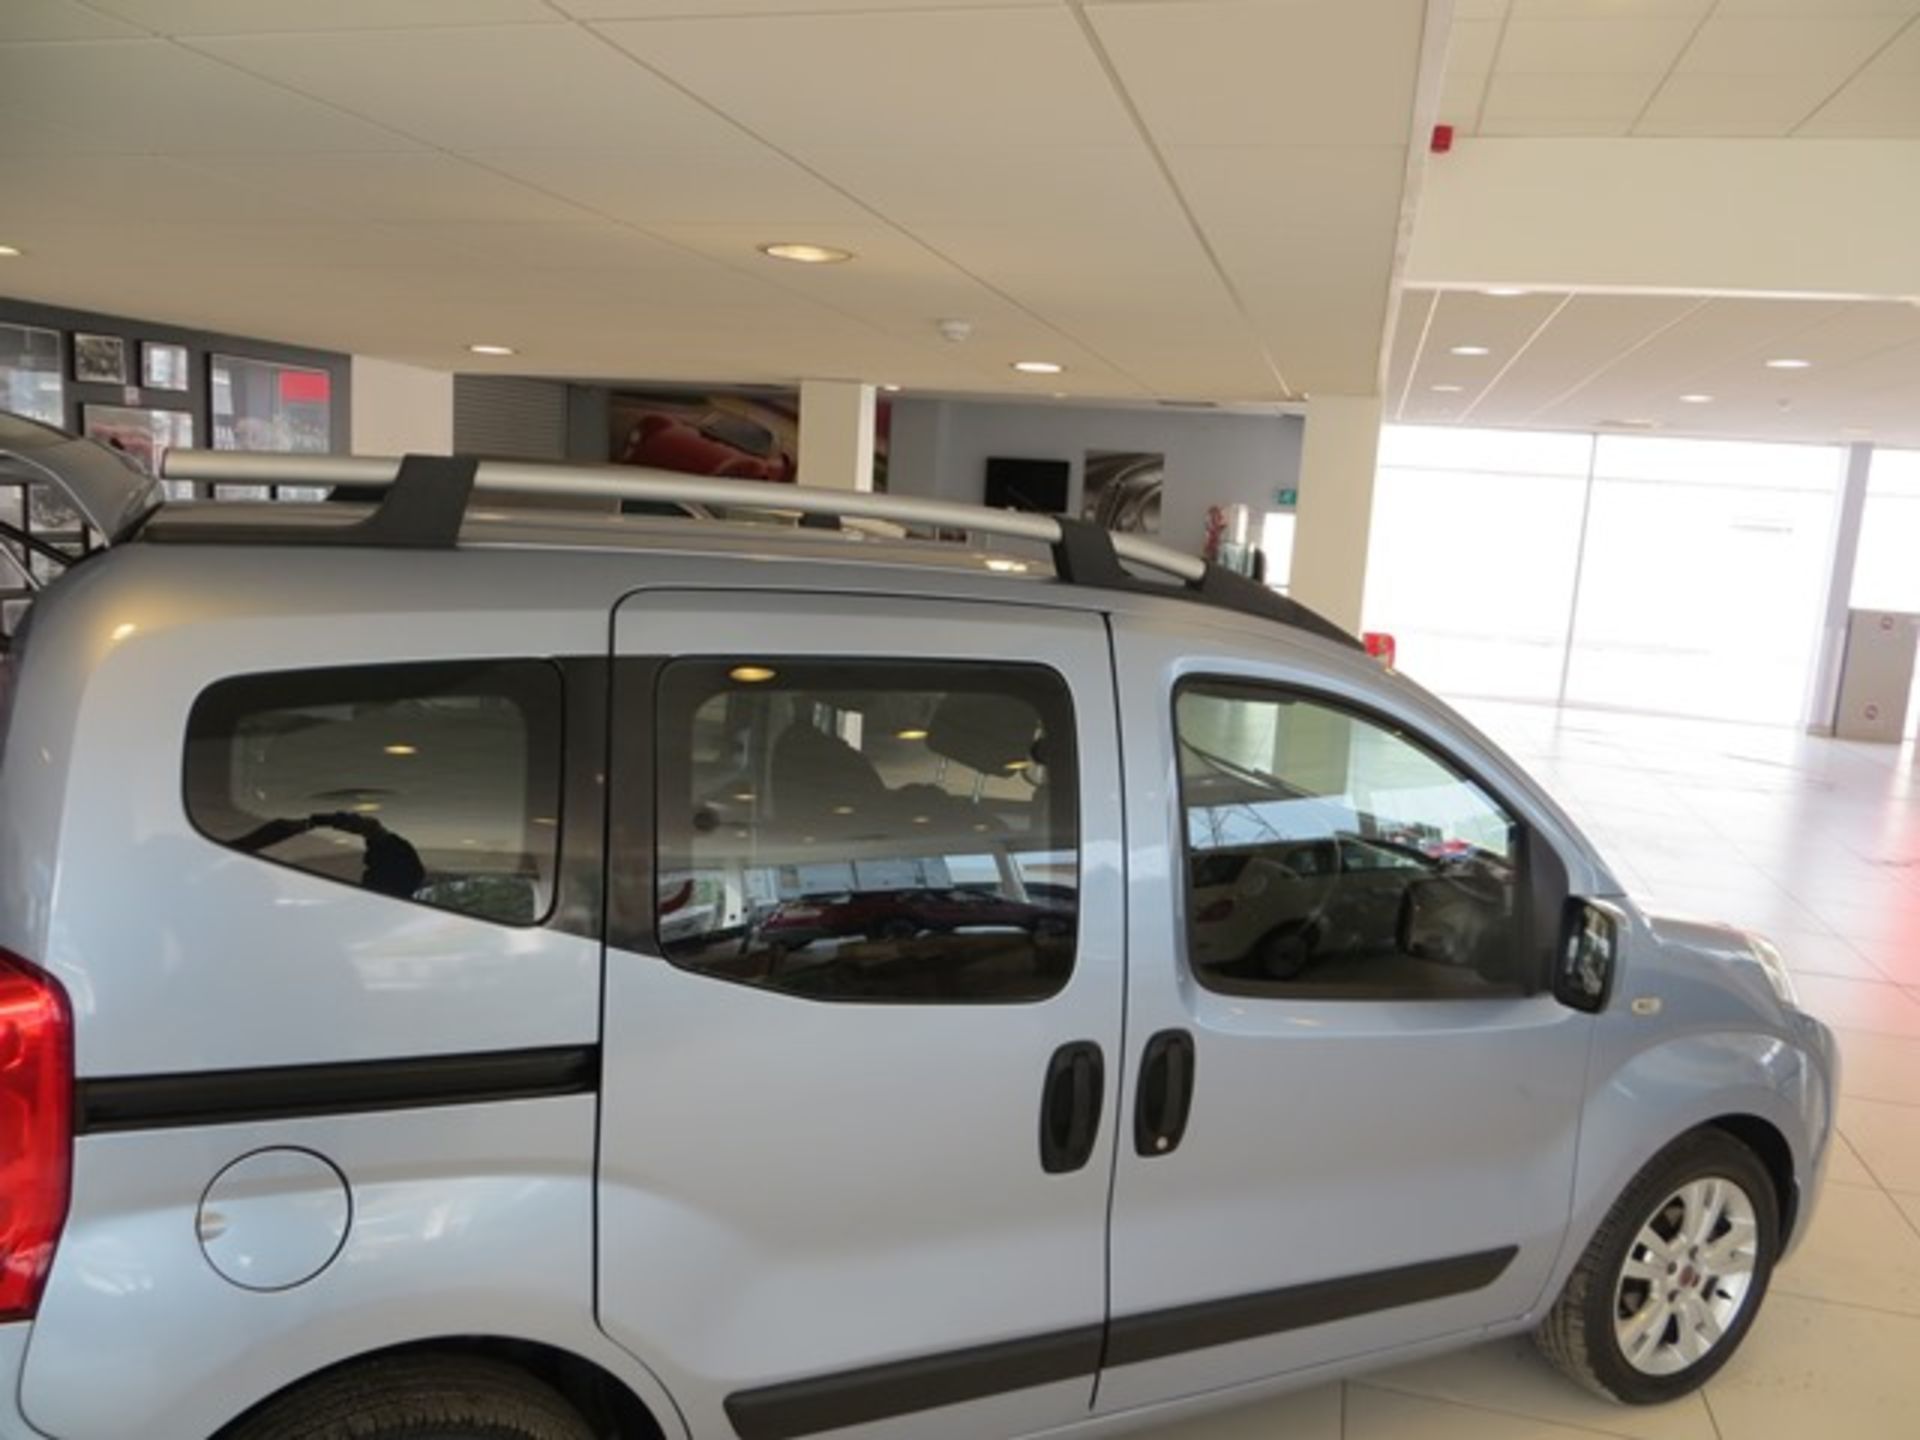 Fiat Qubo with Sirus drive / passenger from wheel chair conversion Dynamic Multijet diesel auto - Image 11 of 11